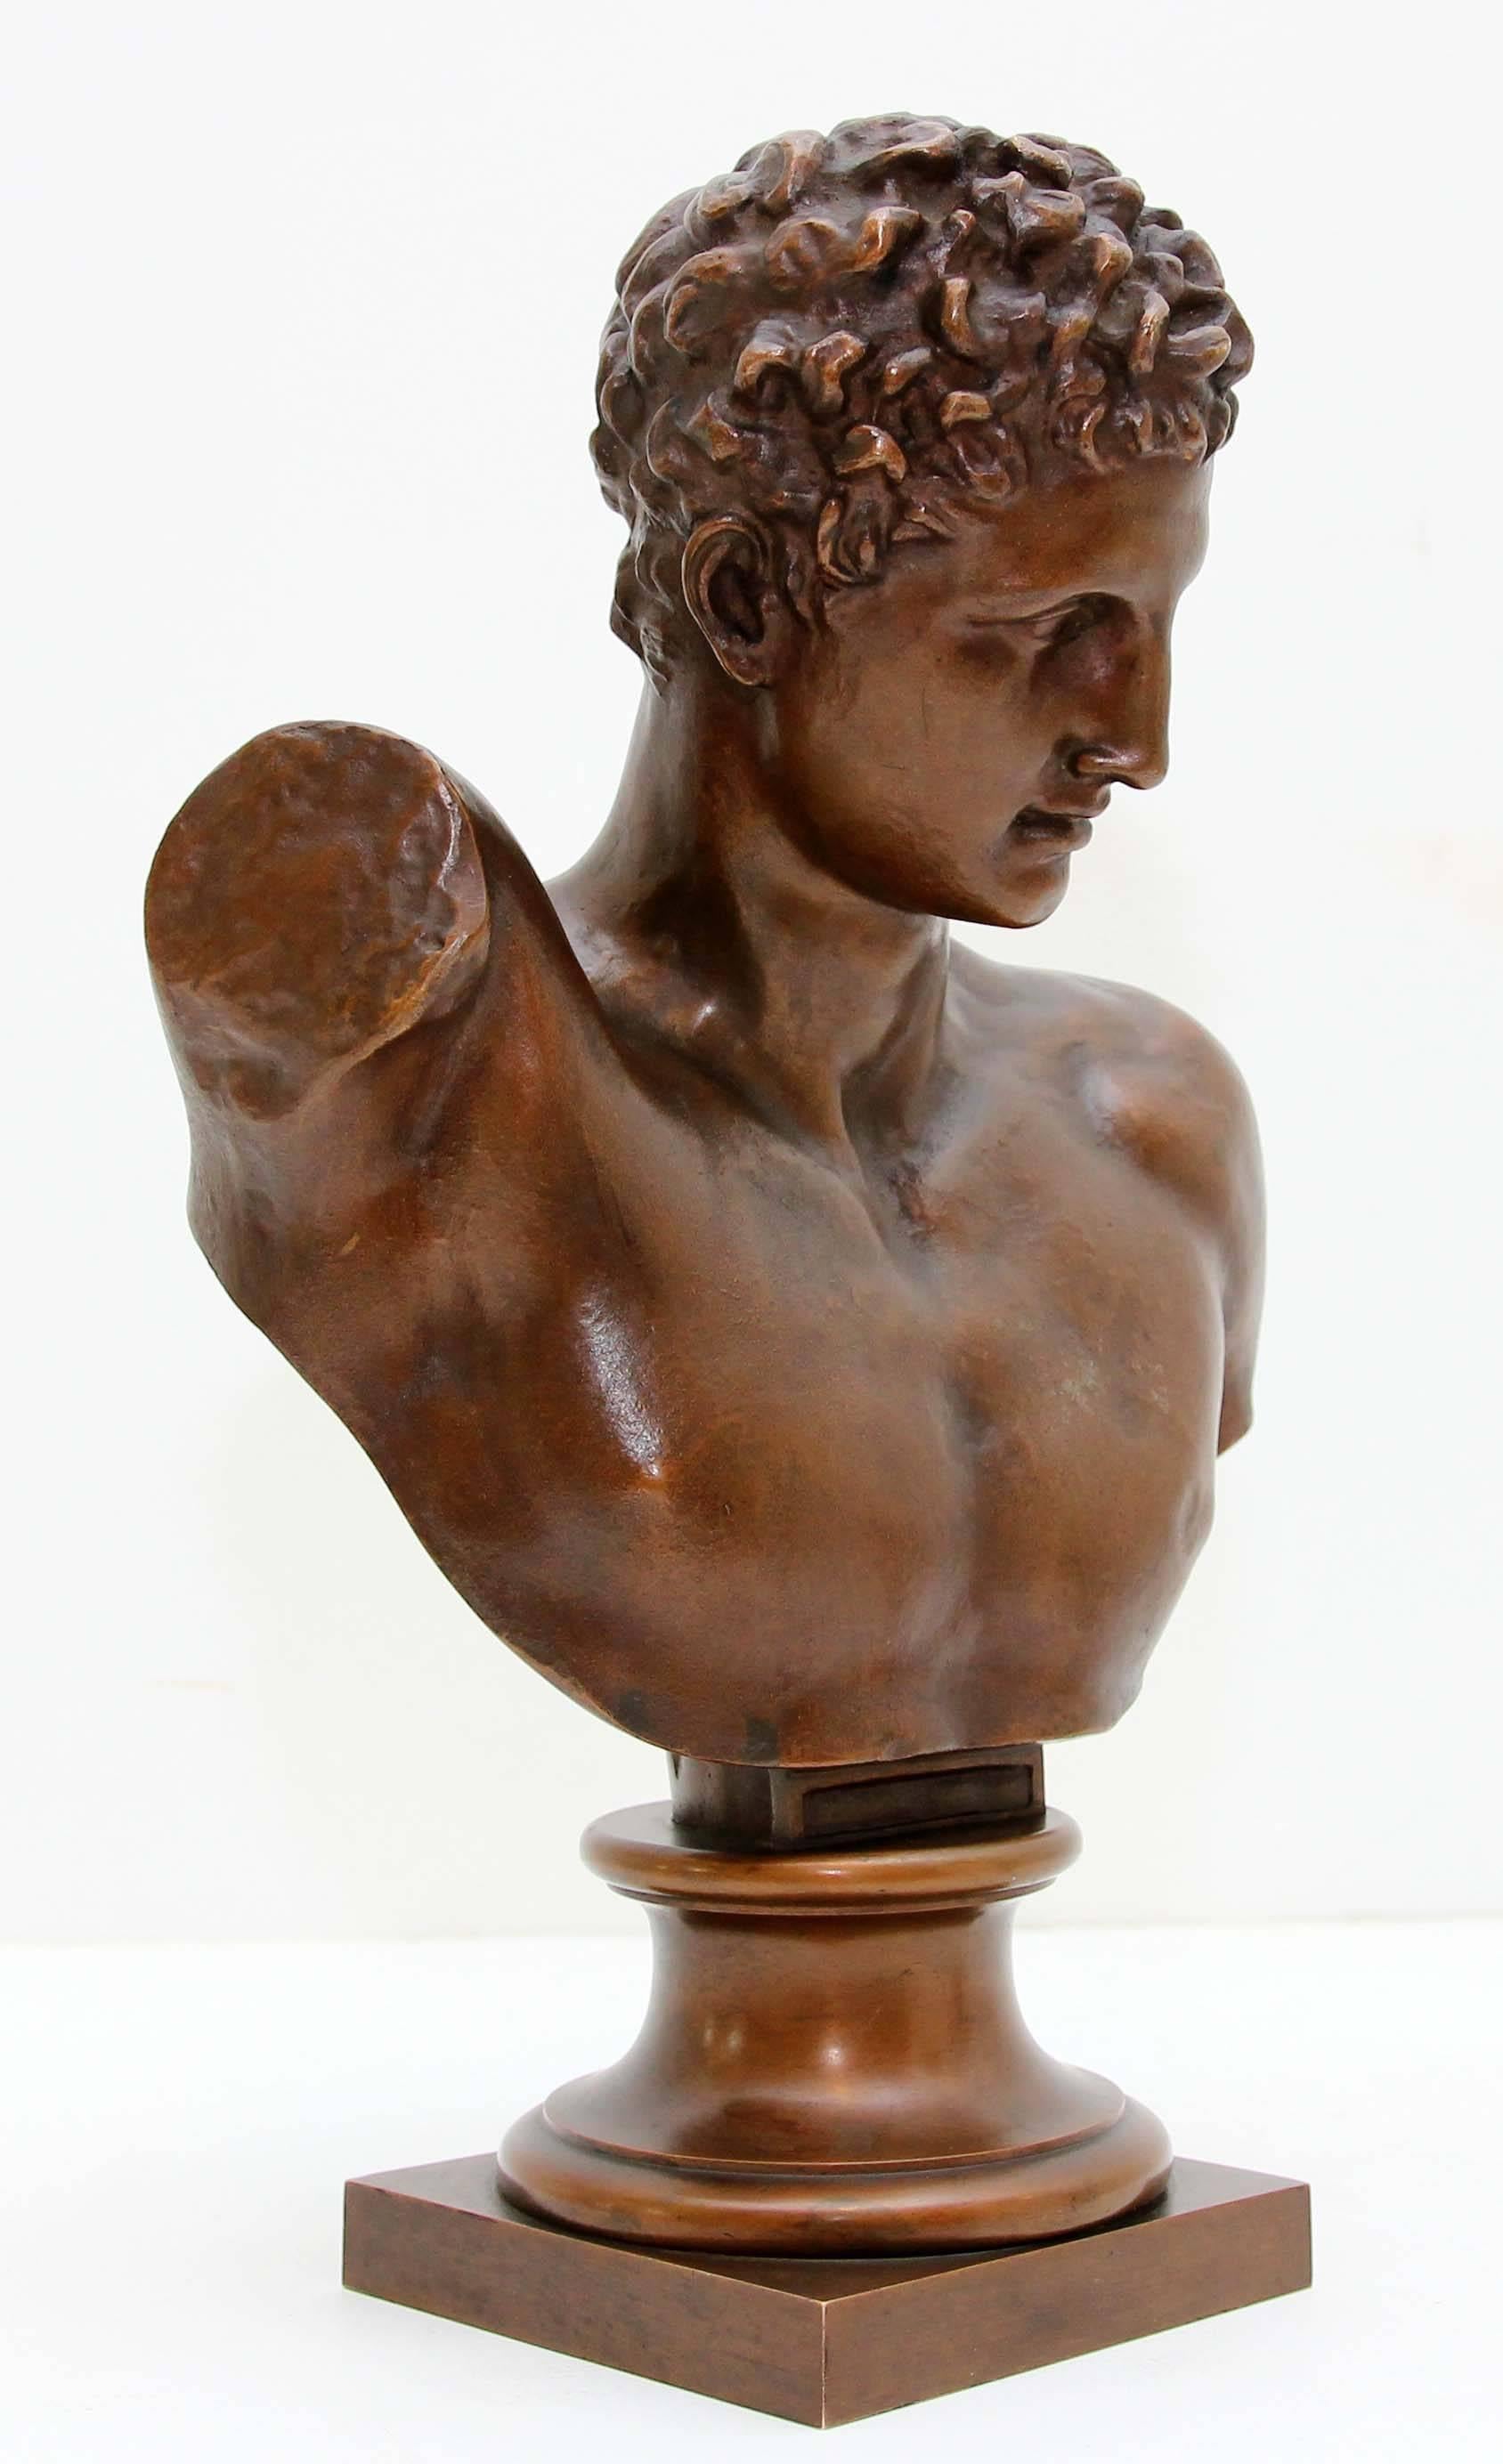 19th century Grand Tour bronze bust of Hermes. Good quality casting with rich patina.